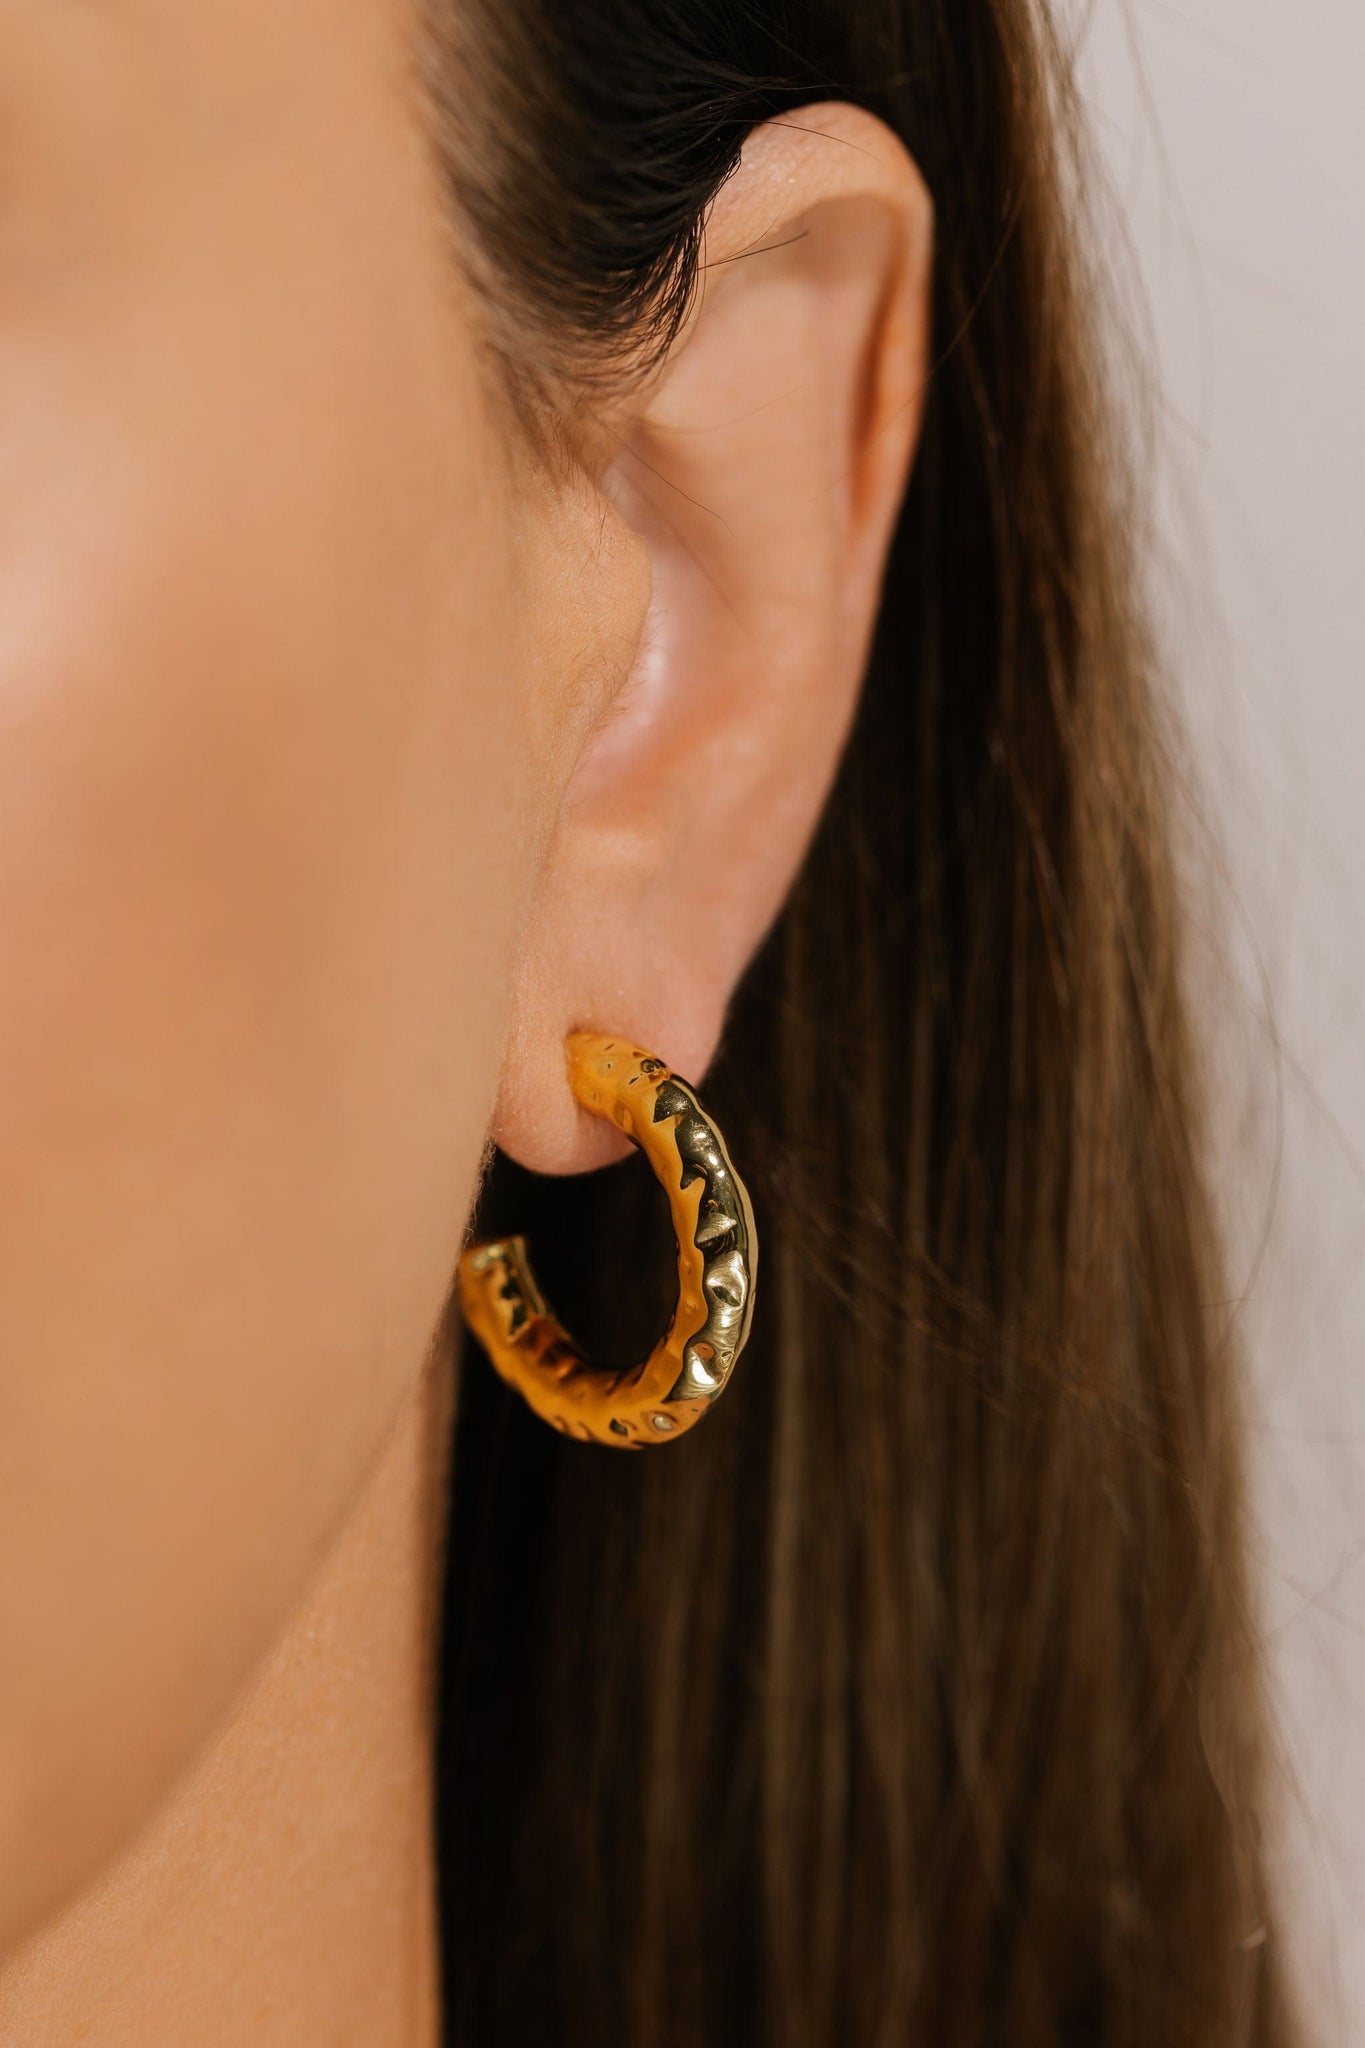 The 25mm Marbella Hoop is a soft, yet elegant accent on the model's ear. 